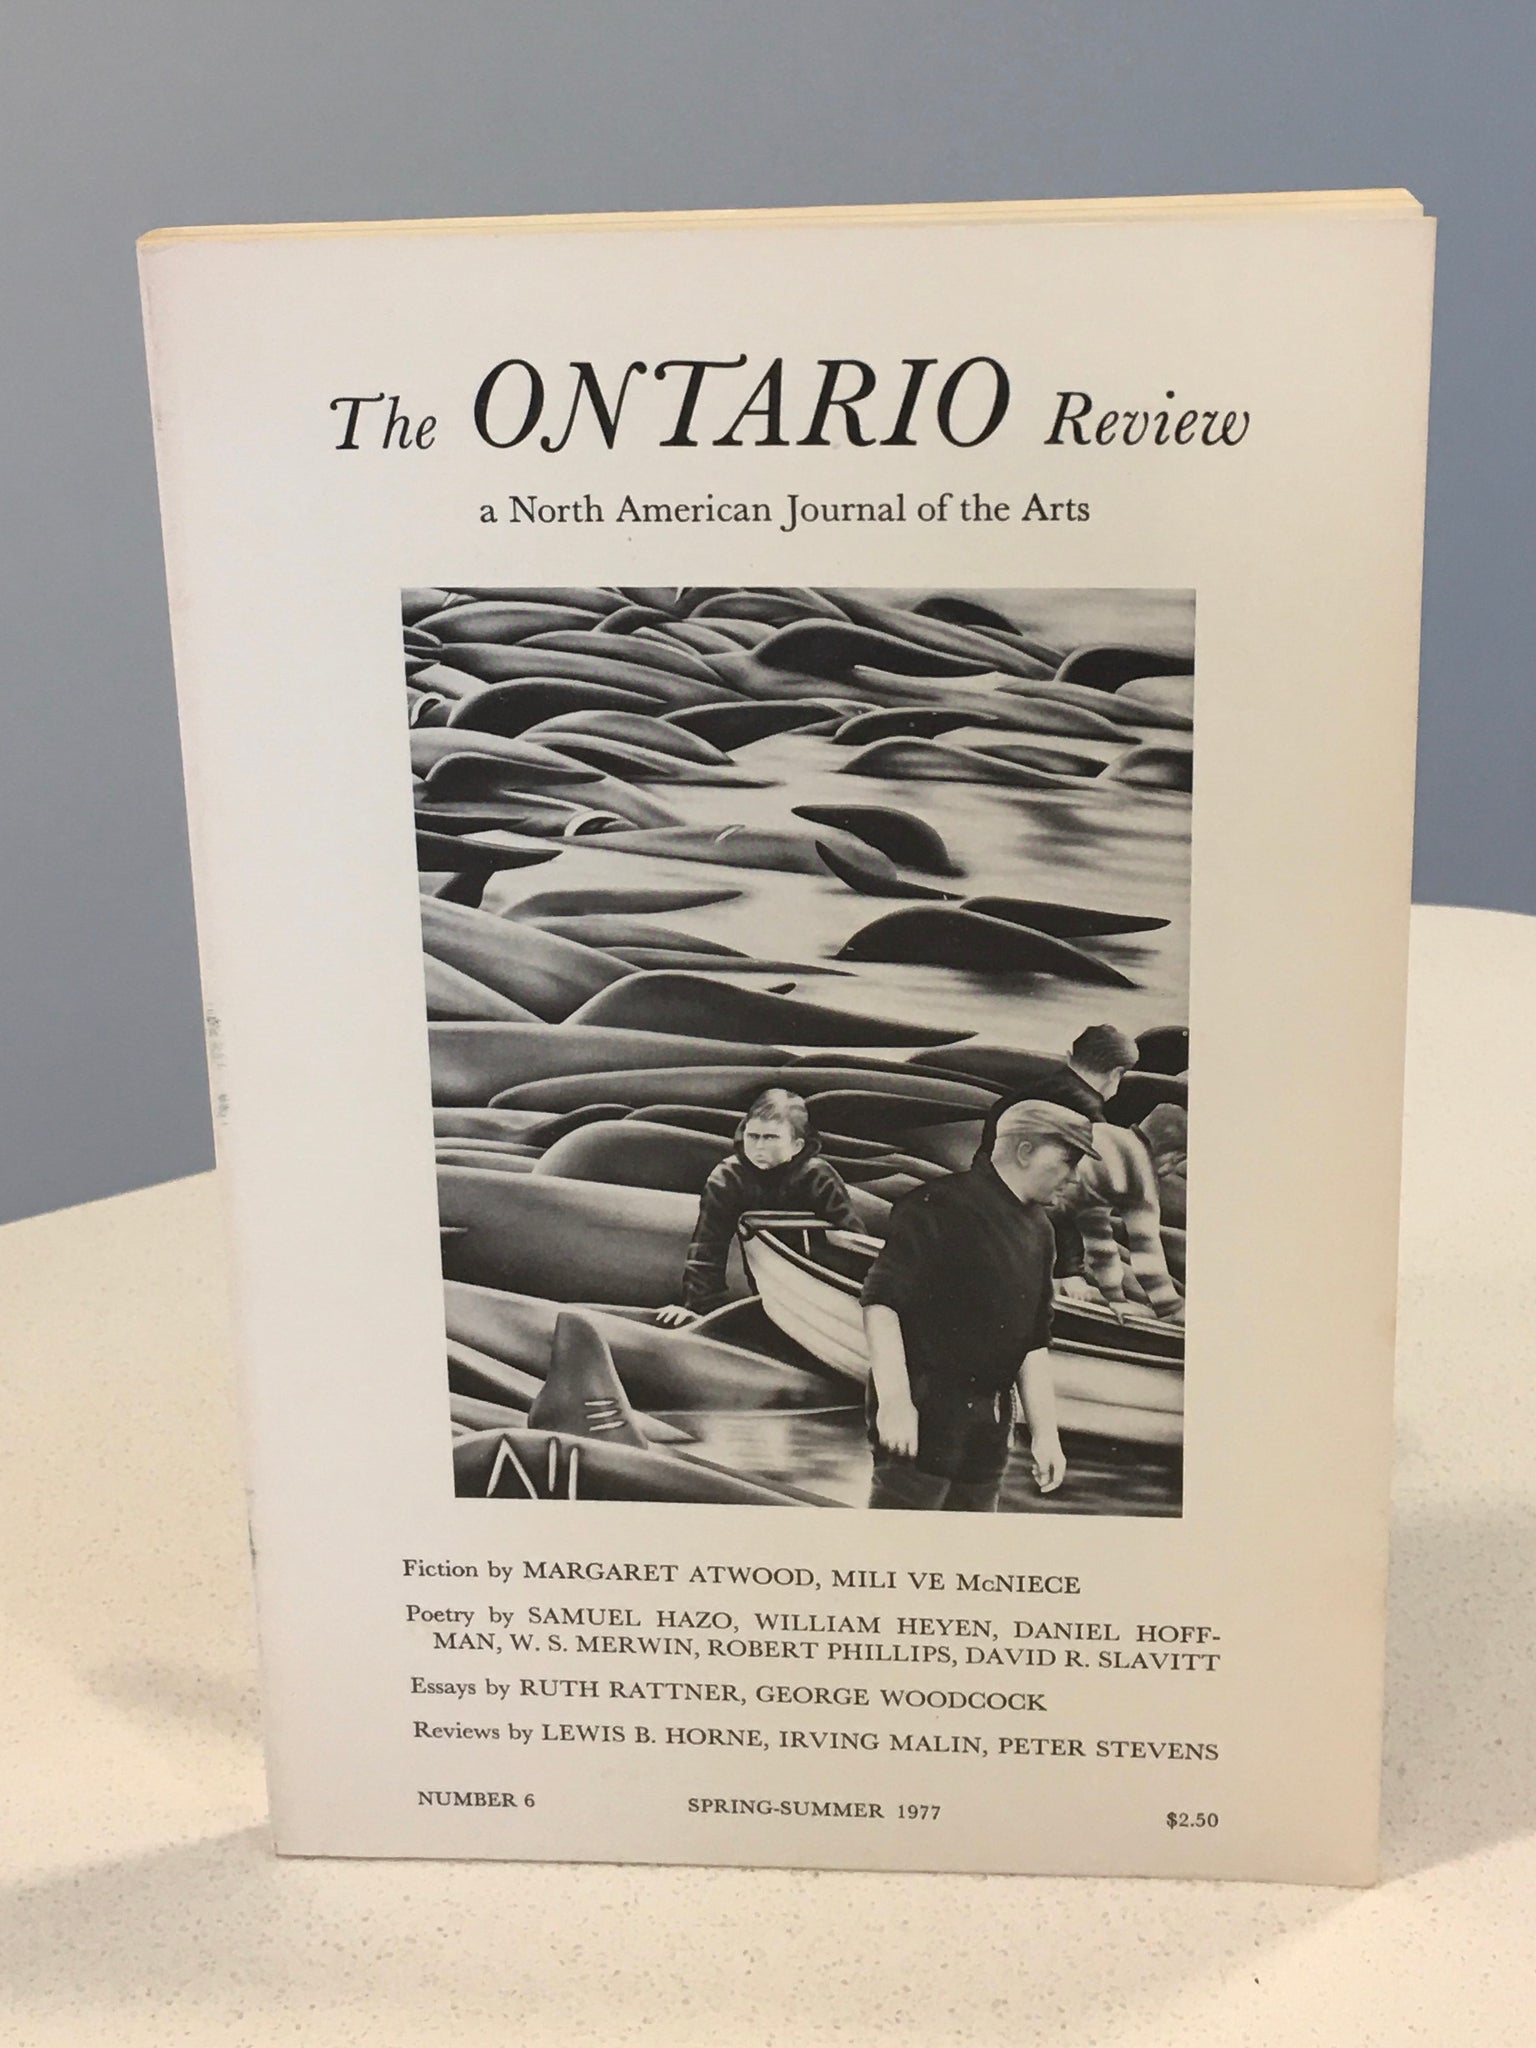 The Ontario Review: A North American Journal of the Arts Spring/Summer 1977. No. 6